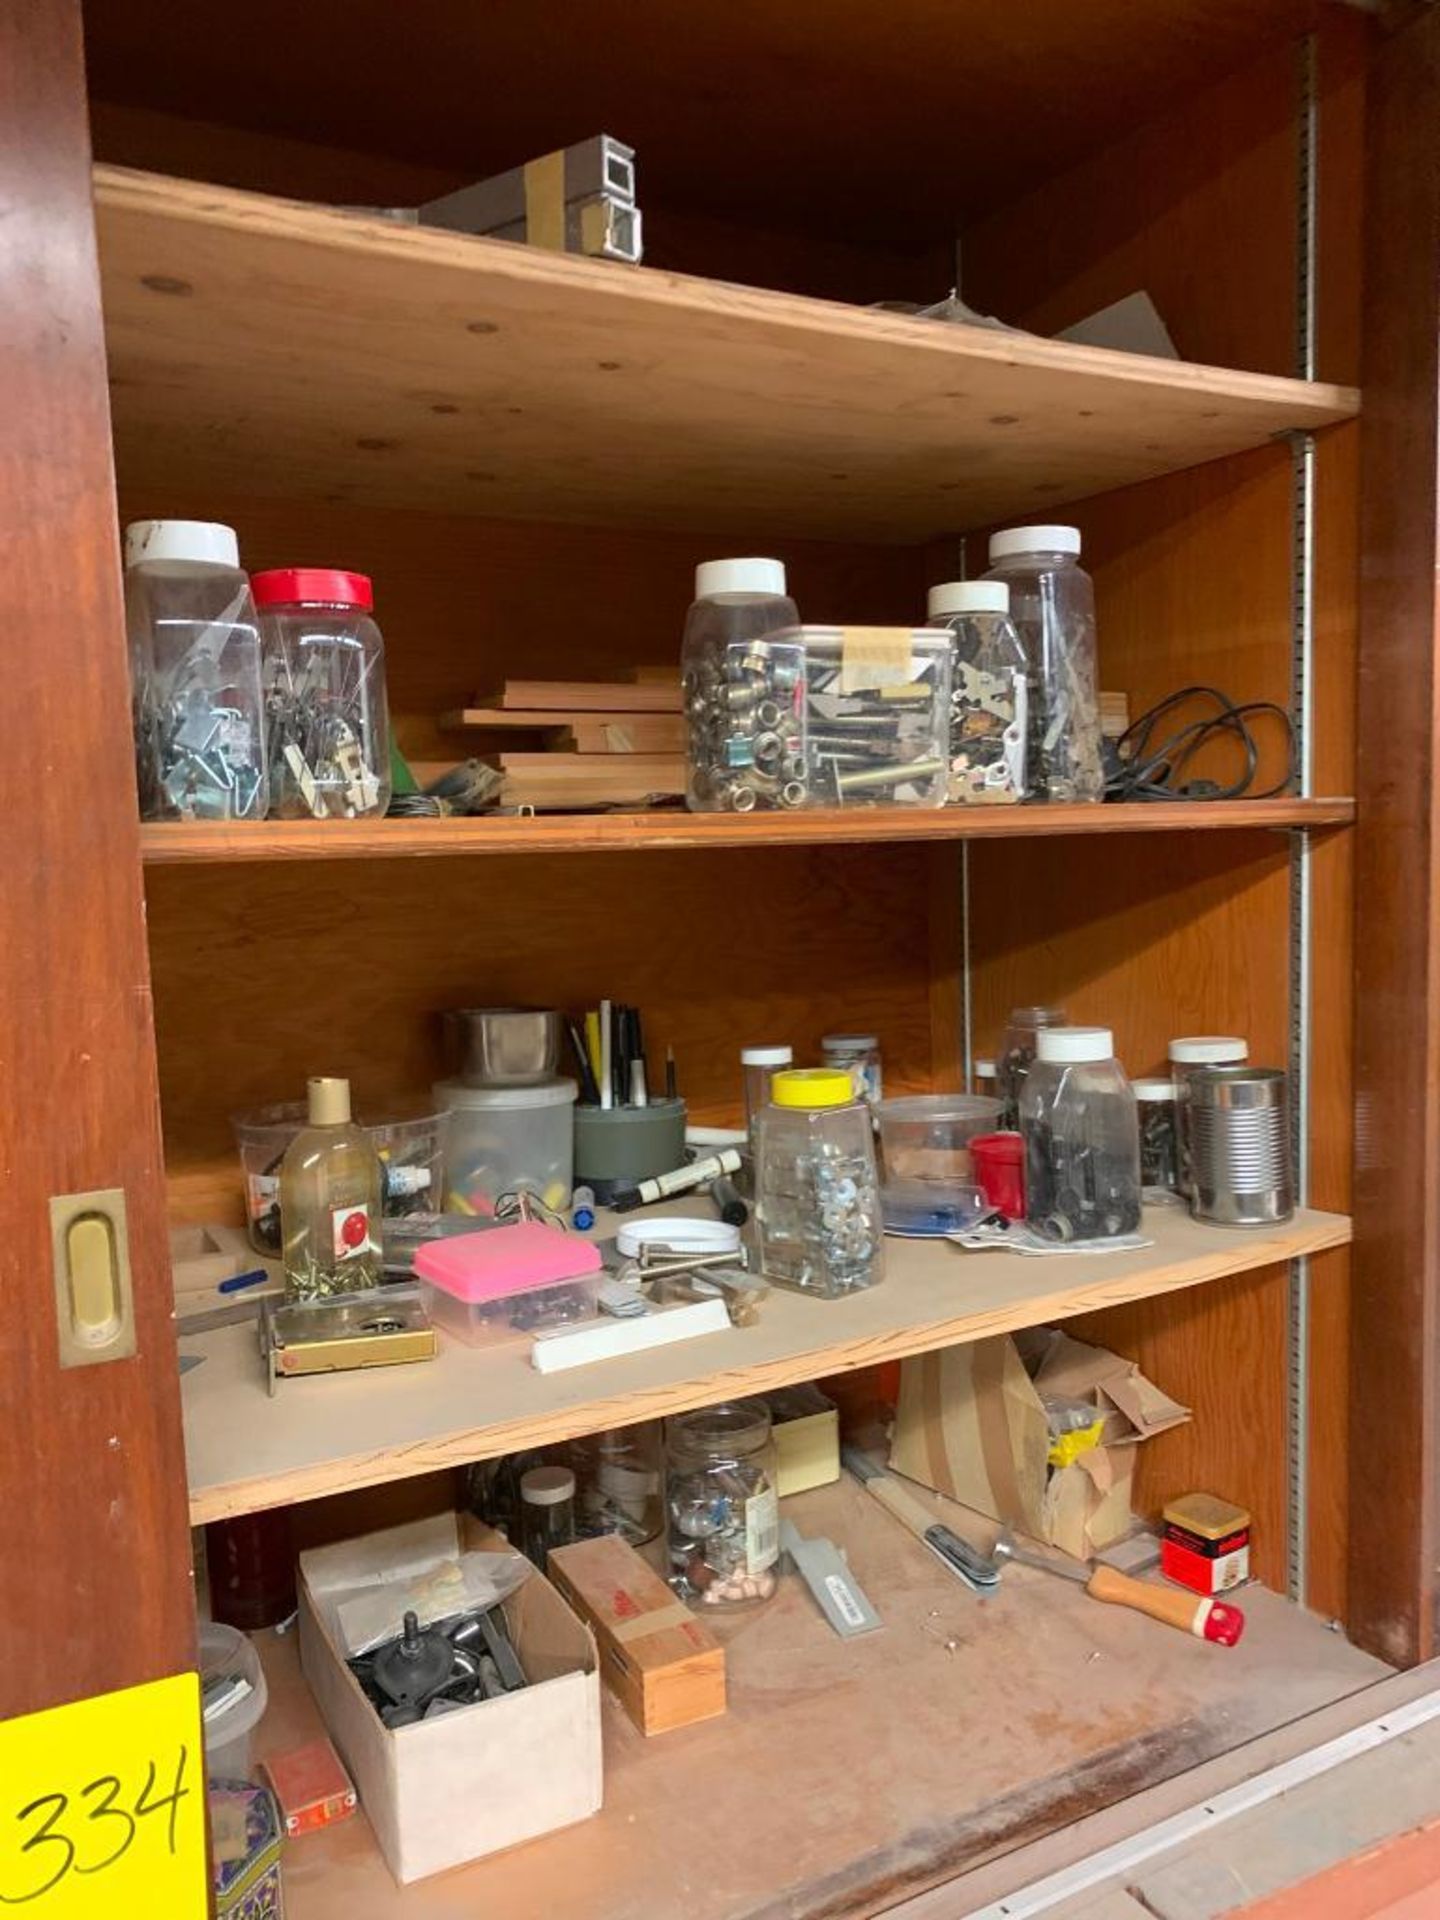 Remaining Contents of Wood Shop; Shelves, Wood Cabinets & Lockers w/ Hardware, Hand Tools, Brackets, - Image 18 of 34